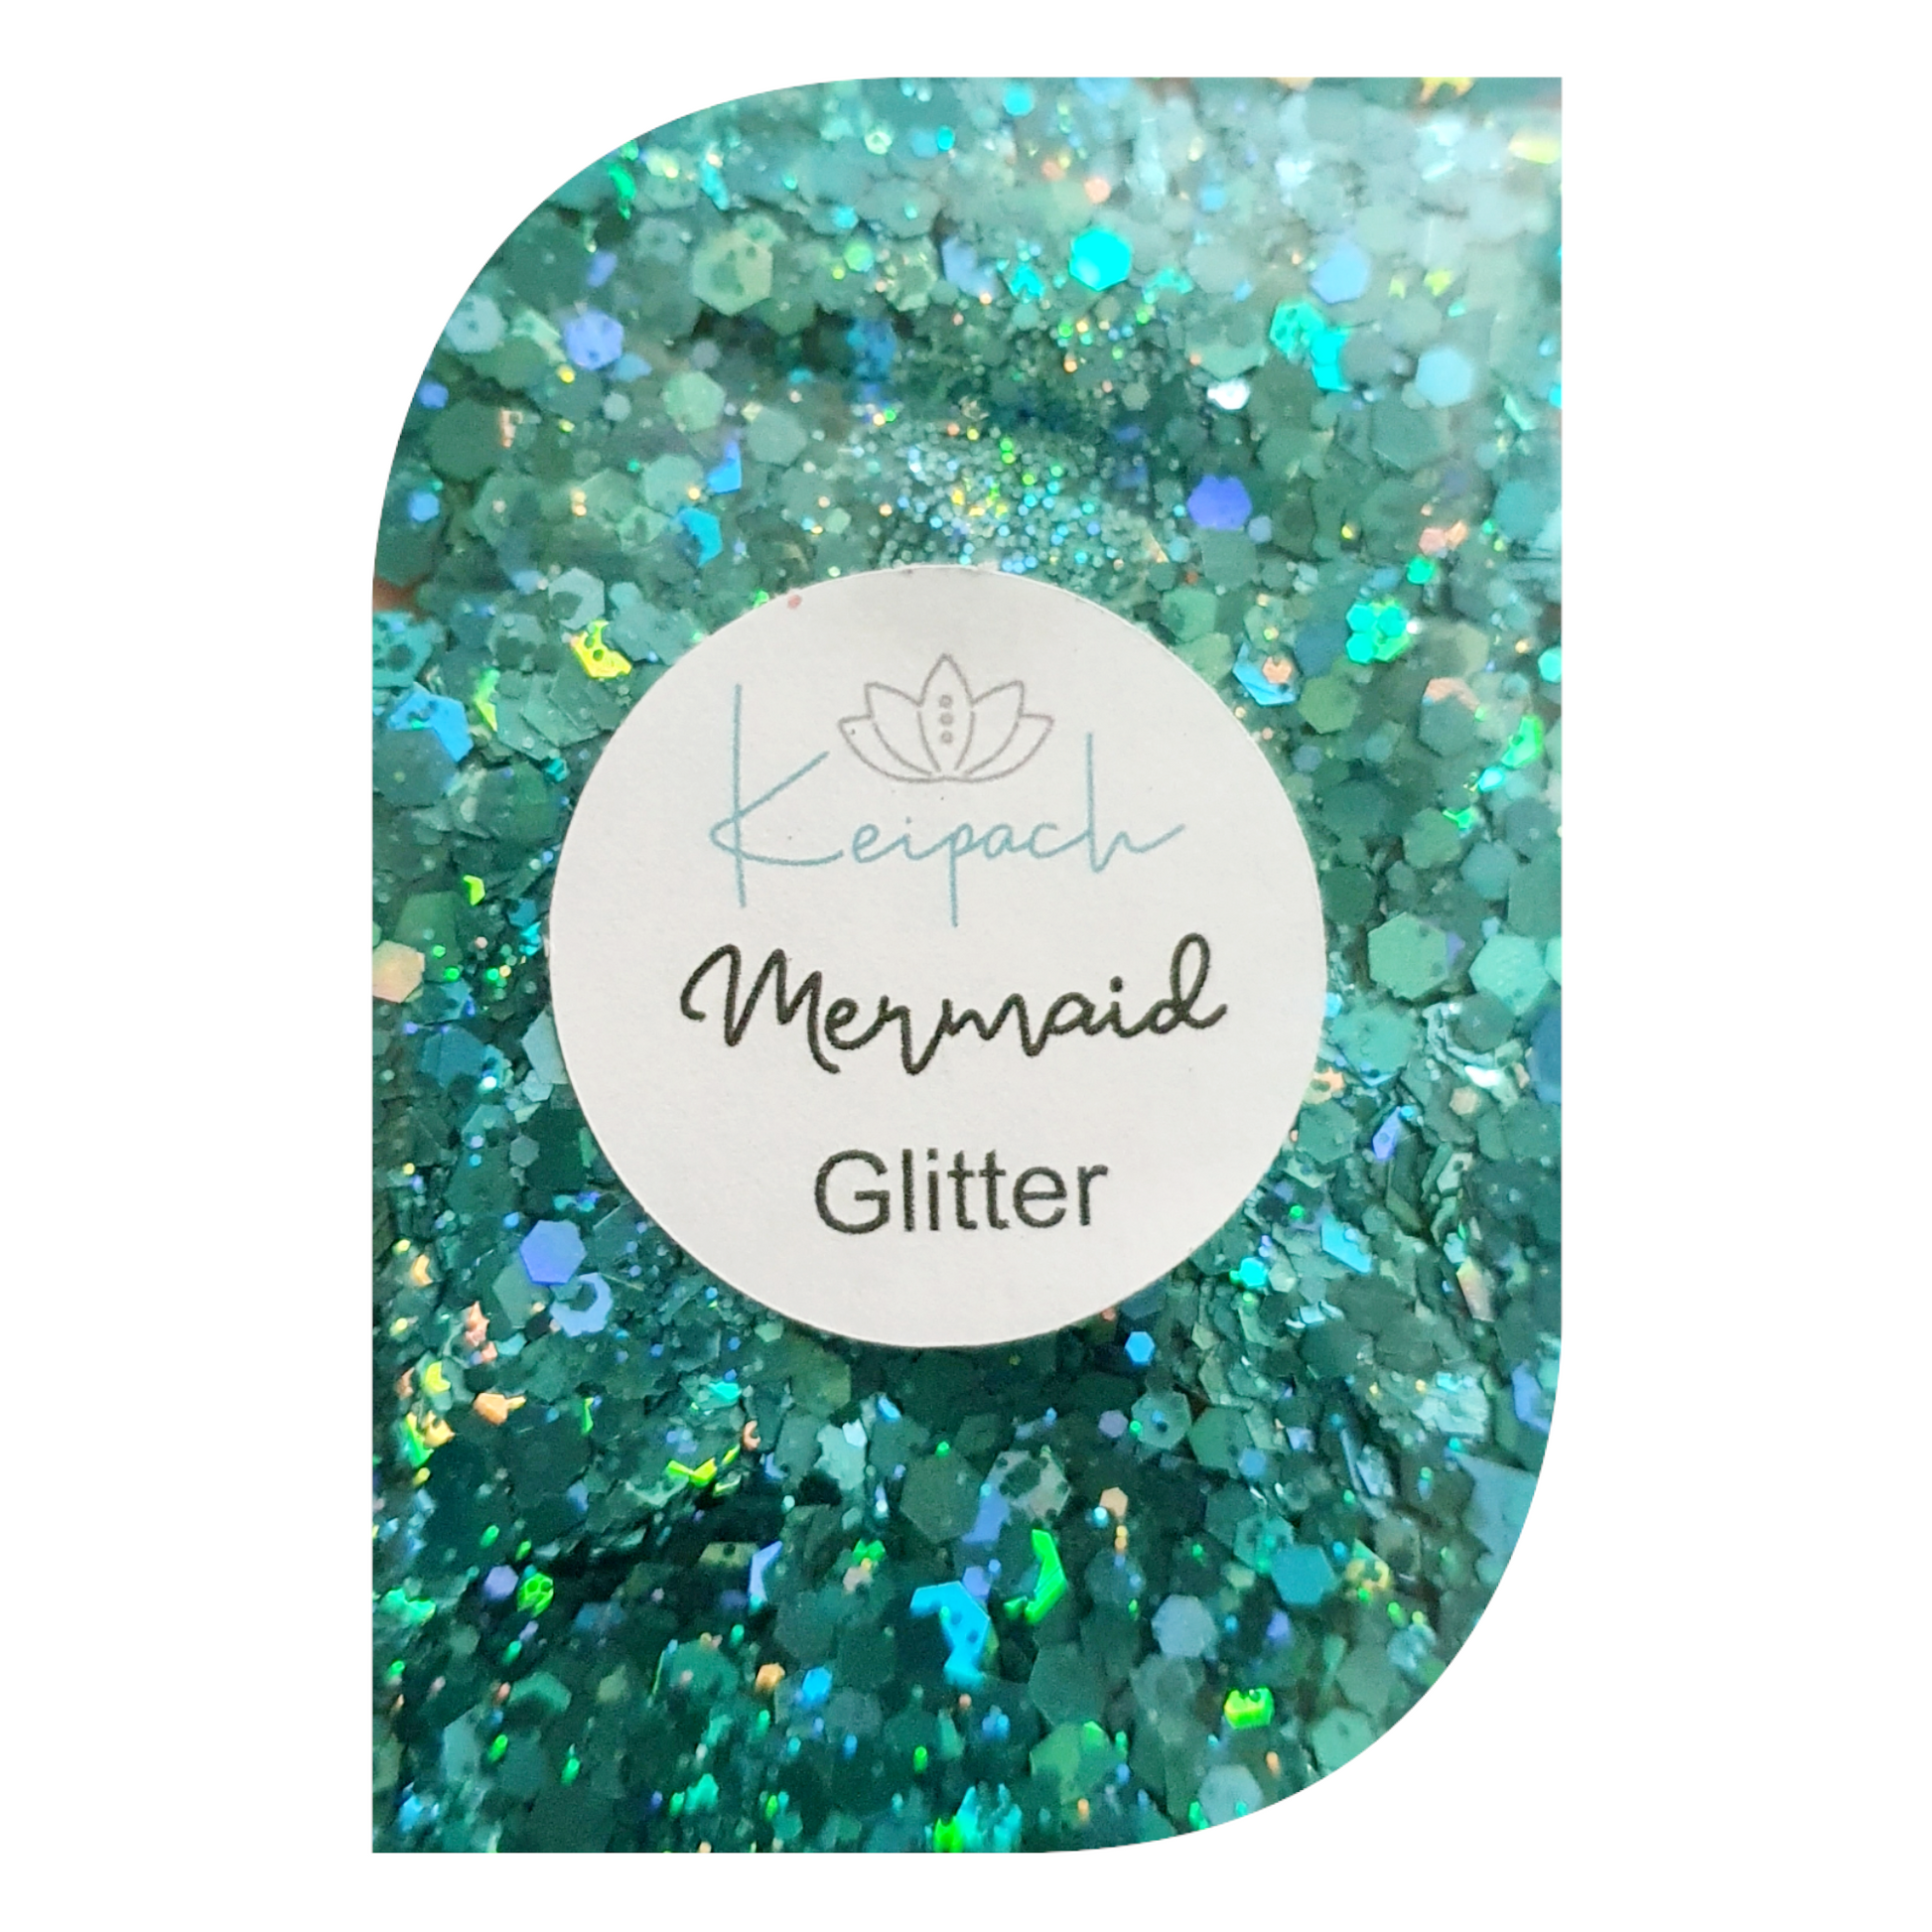 Chunky Holographic Glitter - Mermaid - Keipach